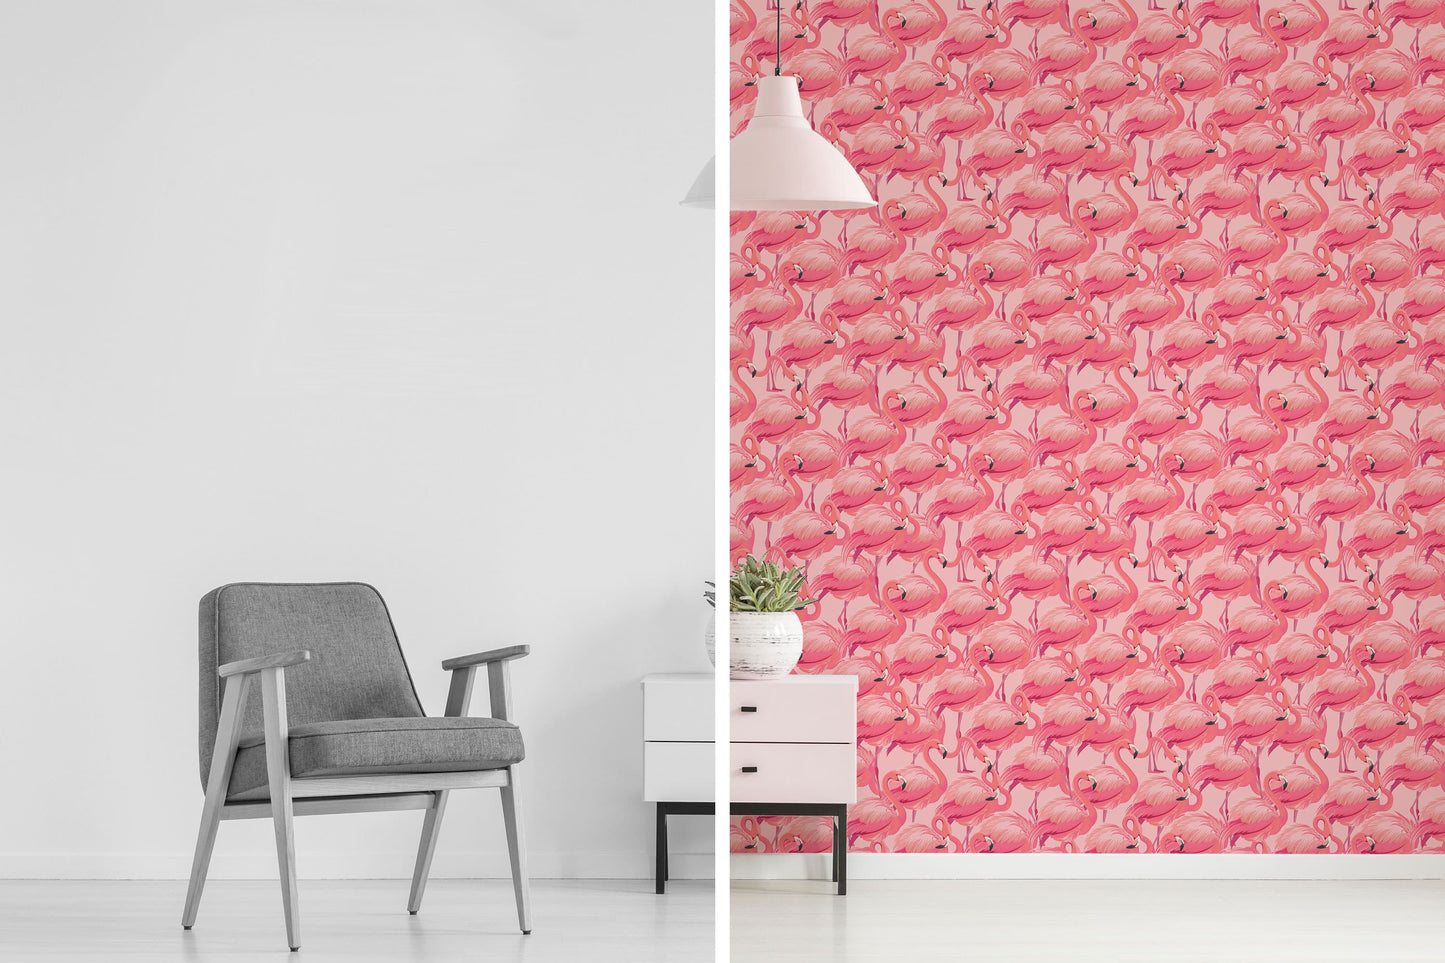 Flamingo Peel-and-Stick or Traditional Wallpaper for your Nursery, Home, Camper van, or Vintage Trailer,